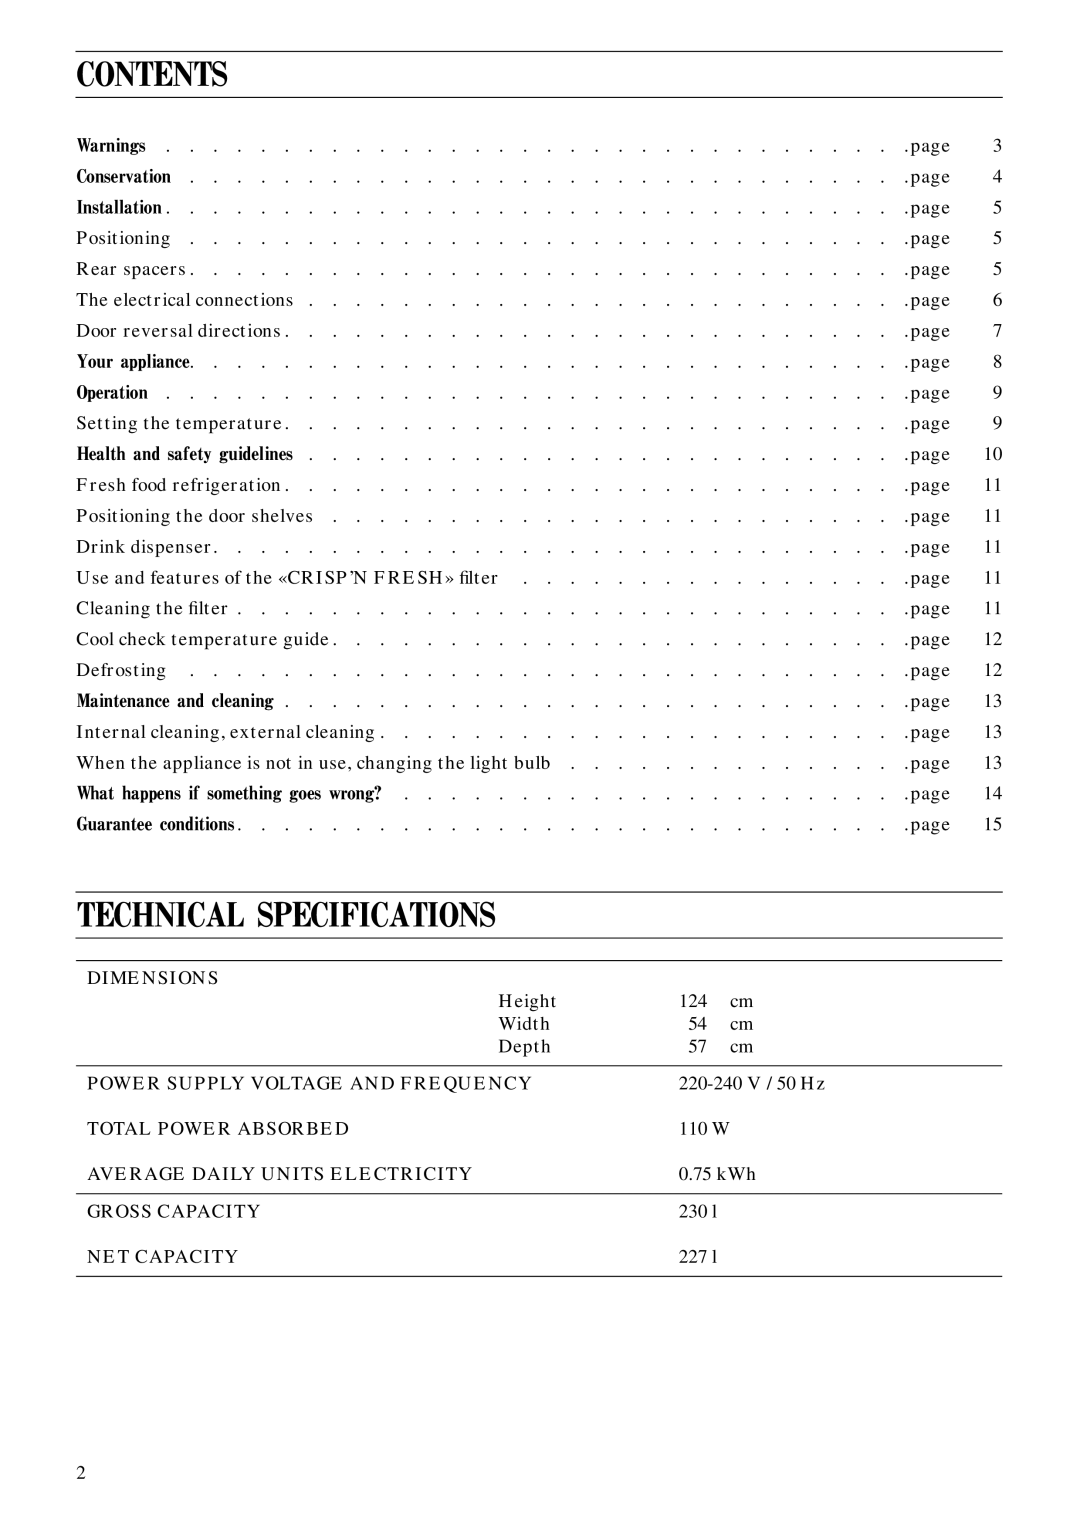 Zanussi ZFC 83 L manual Contents, Technical Specifications 